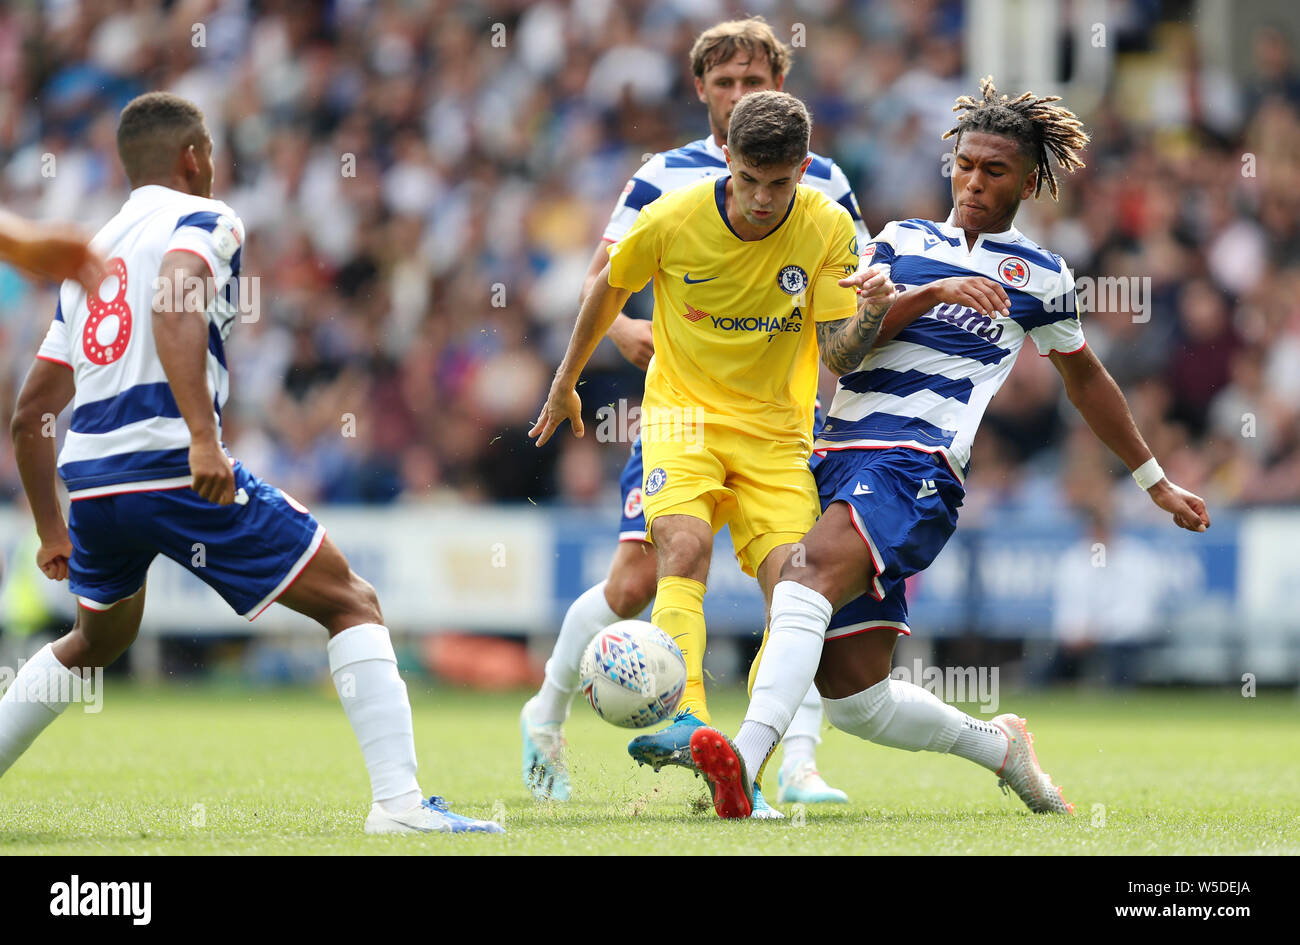 Chelsea's Christian Pulisic (left) and Reading's Danny Loader battle for the ball during the pre-season friendly match at the Madejski Stadium, Reading. Stock Photo